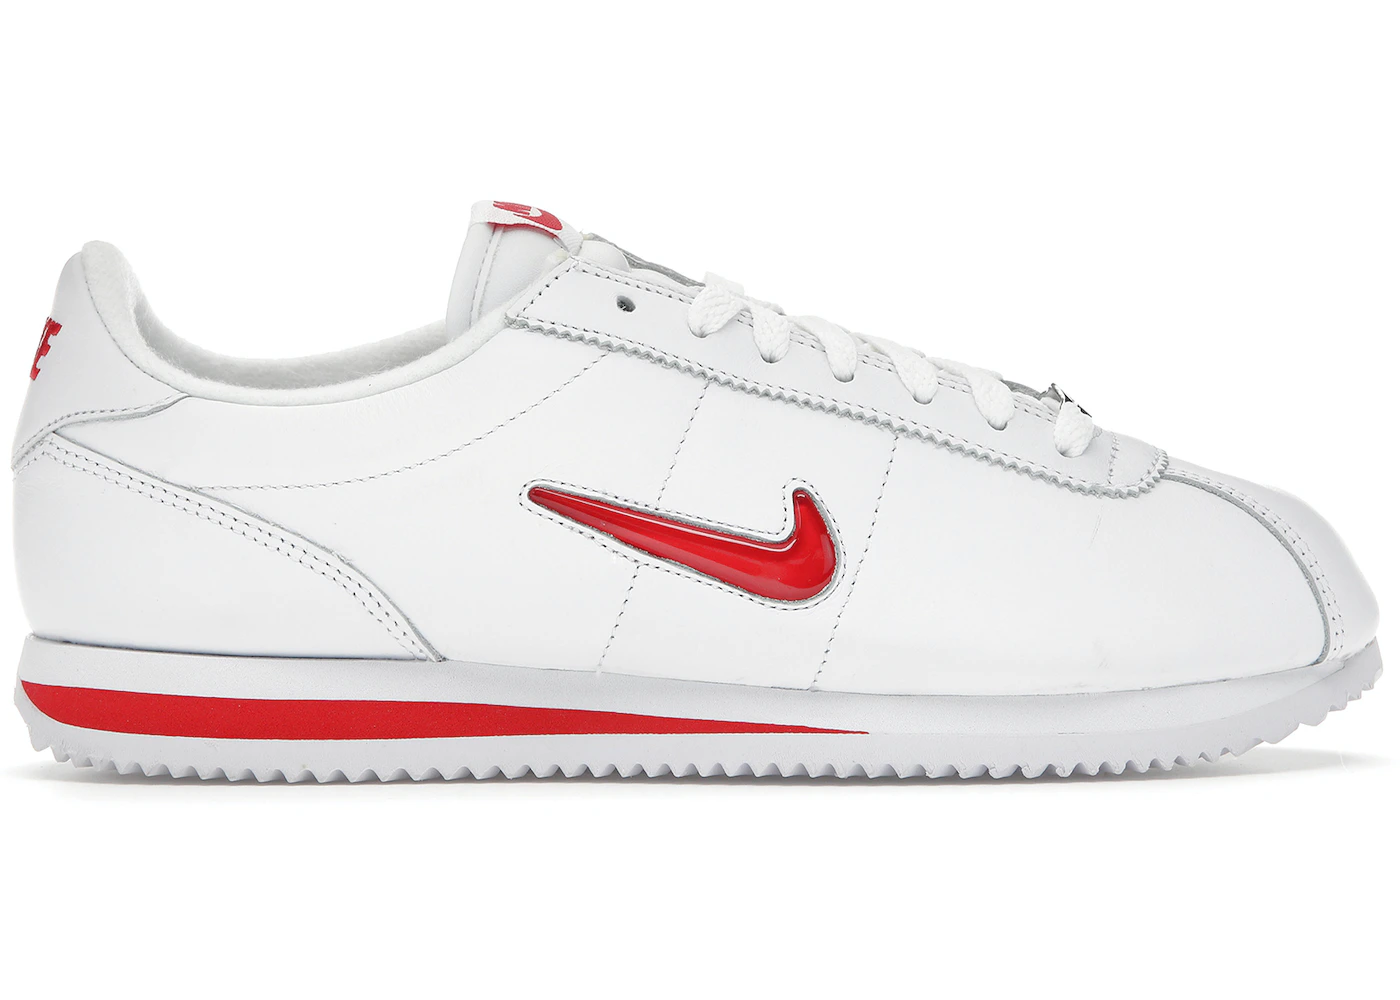 Middeleeuws dividend Circus Nike Cortez Basic Jewel Rare Ruby - 938343-100 - US